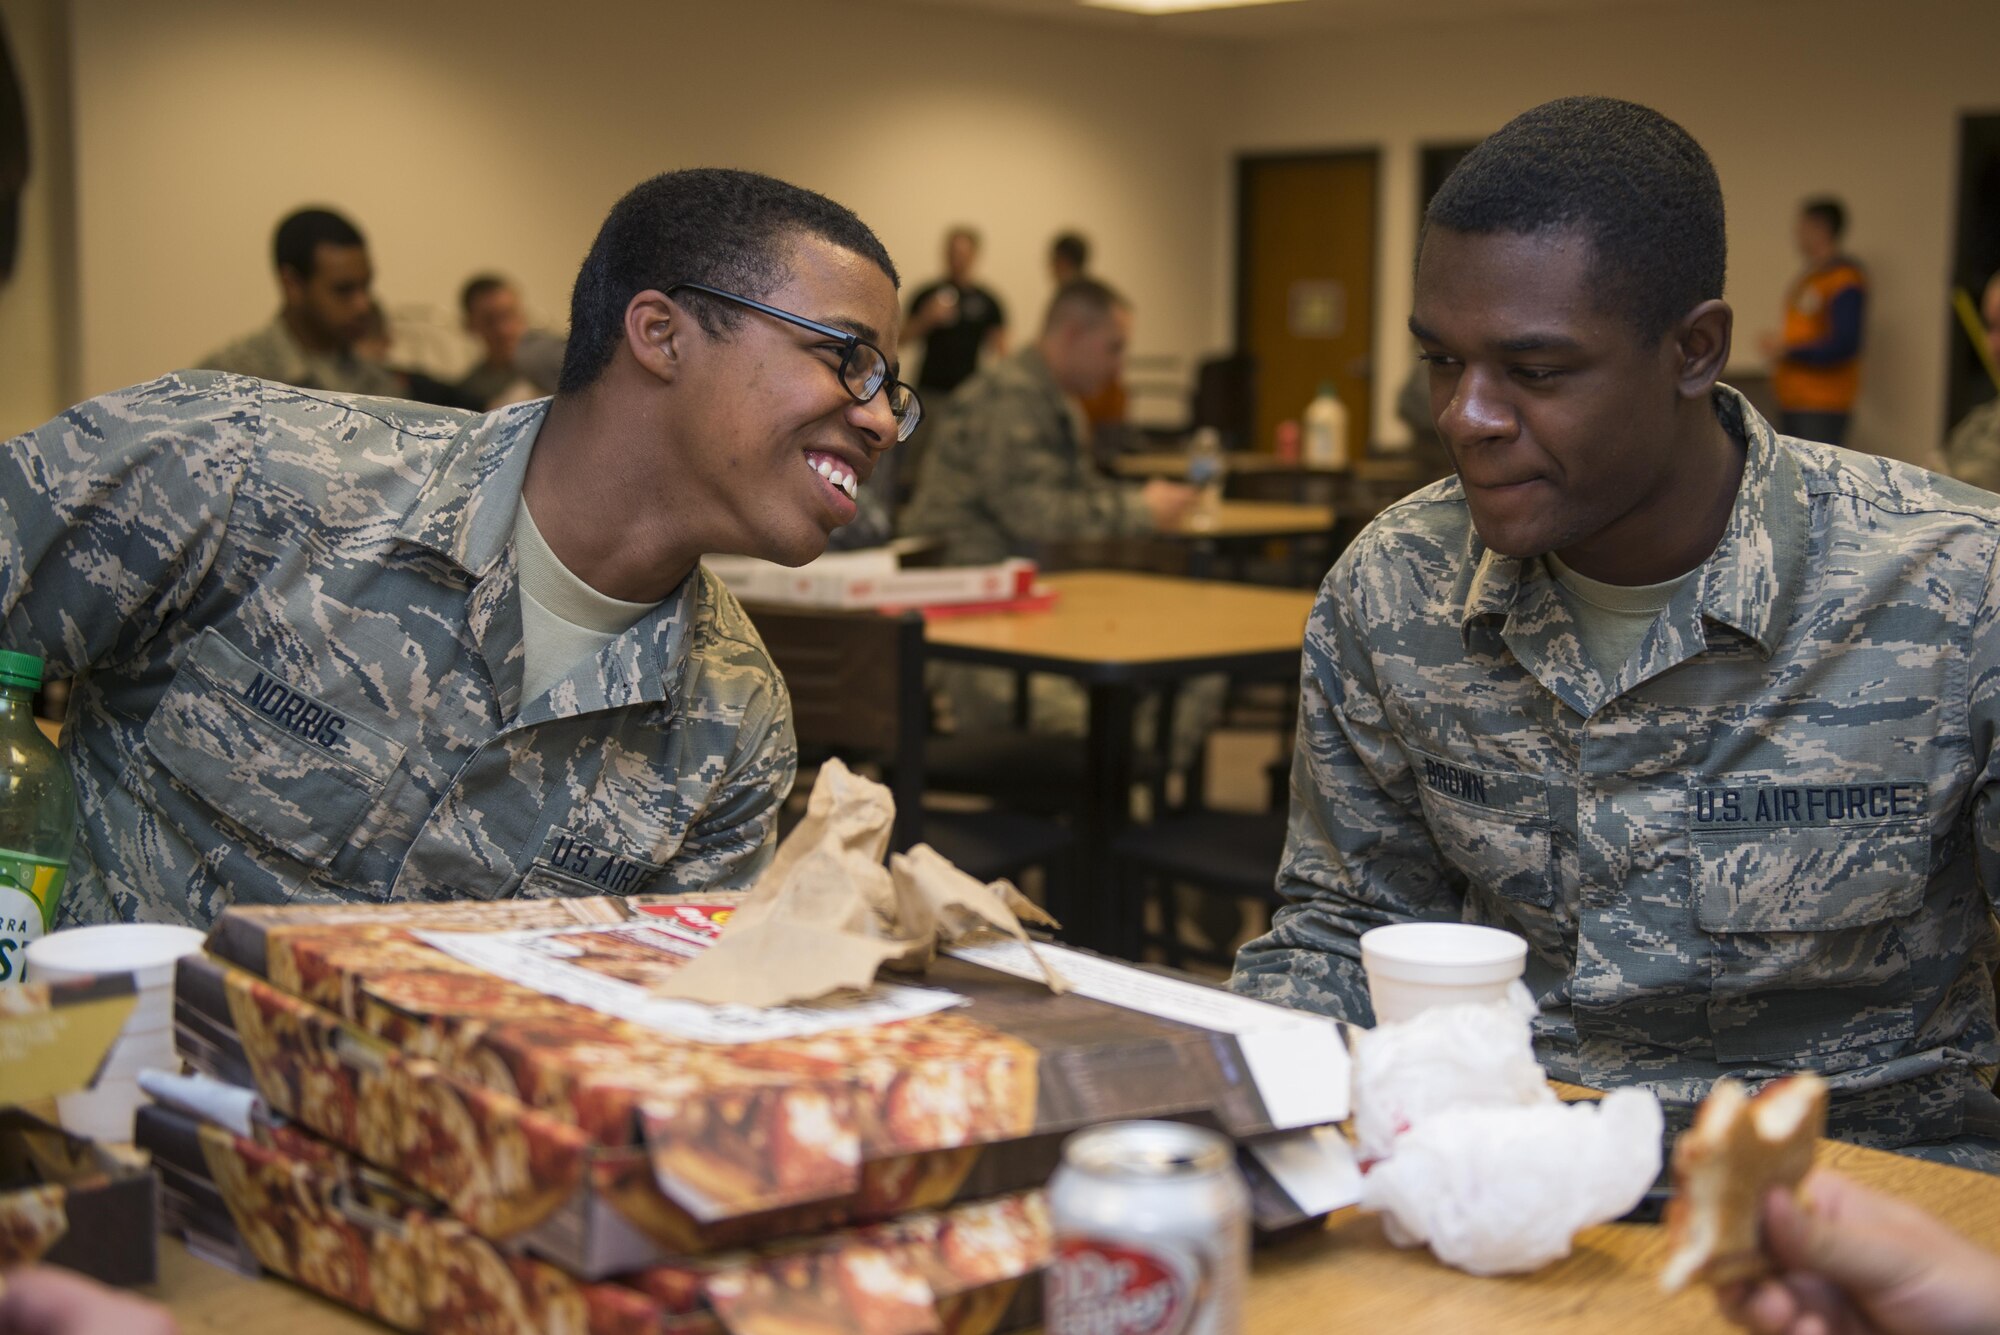 Airman Alijah Norris (left) and Airman Alante Brown (right), 366th Training Squadron students, attend a Super Bowl party at the Sheppard Air Force Base, Texas, Solid Rock Cafe. The Chapel staff served more than 400 people on Super Bowl Sunday, investing nearly $800 in their spiritual health, morale and well-being, Feb. 7, 2016. Sheppard chaplains also serve nearly 180,000 visitors annually, with the largest Airman Ministry Center in the Air Force. (U.S. Air Force photo/Senior Airman Kyle Gese)